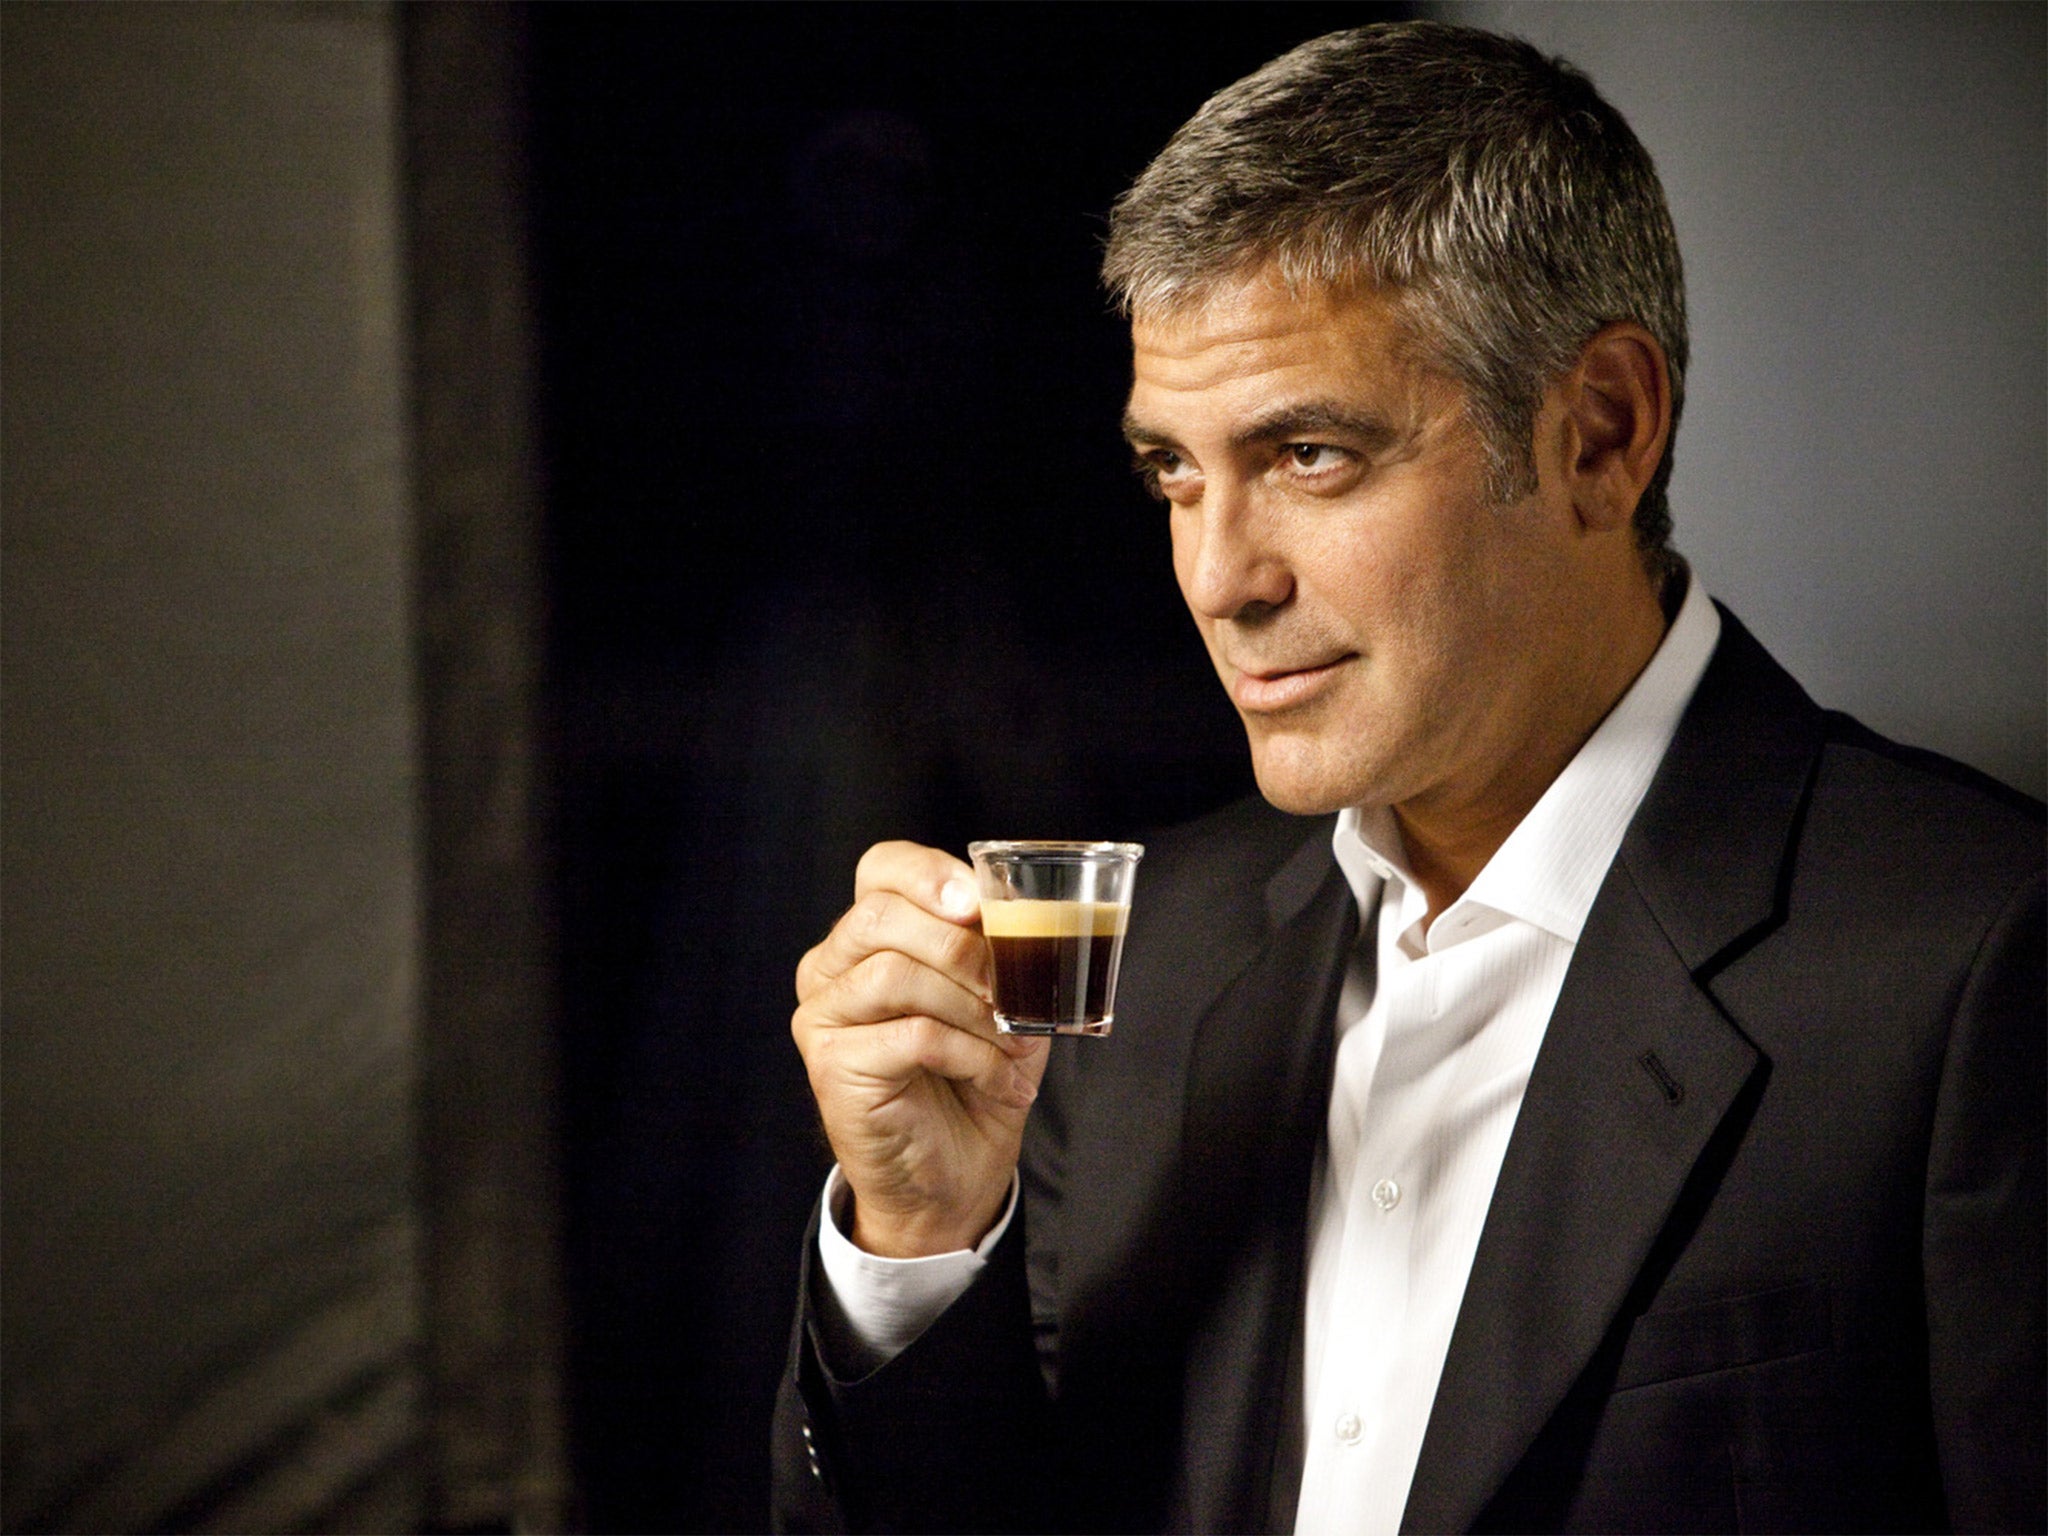 George Clooney appearing in an advert for Nespresso machines